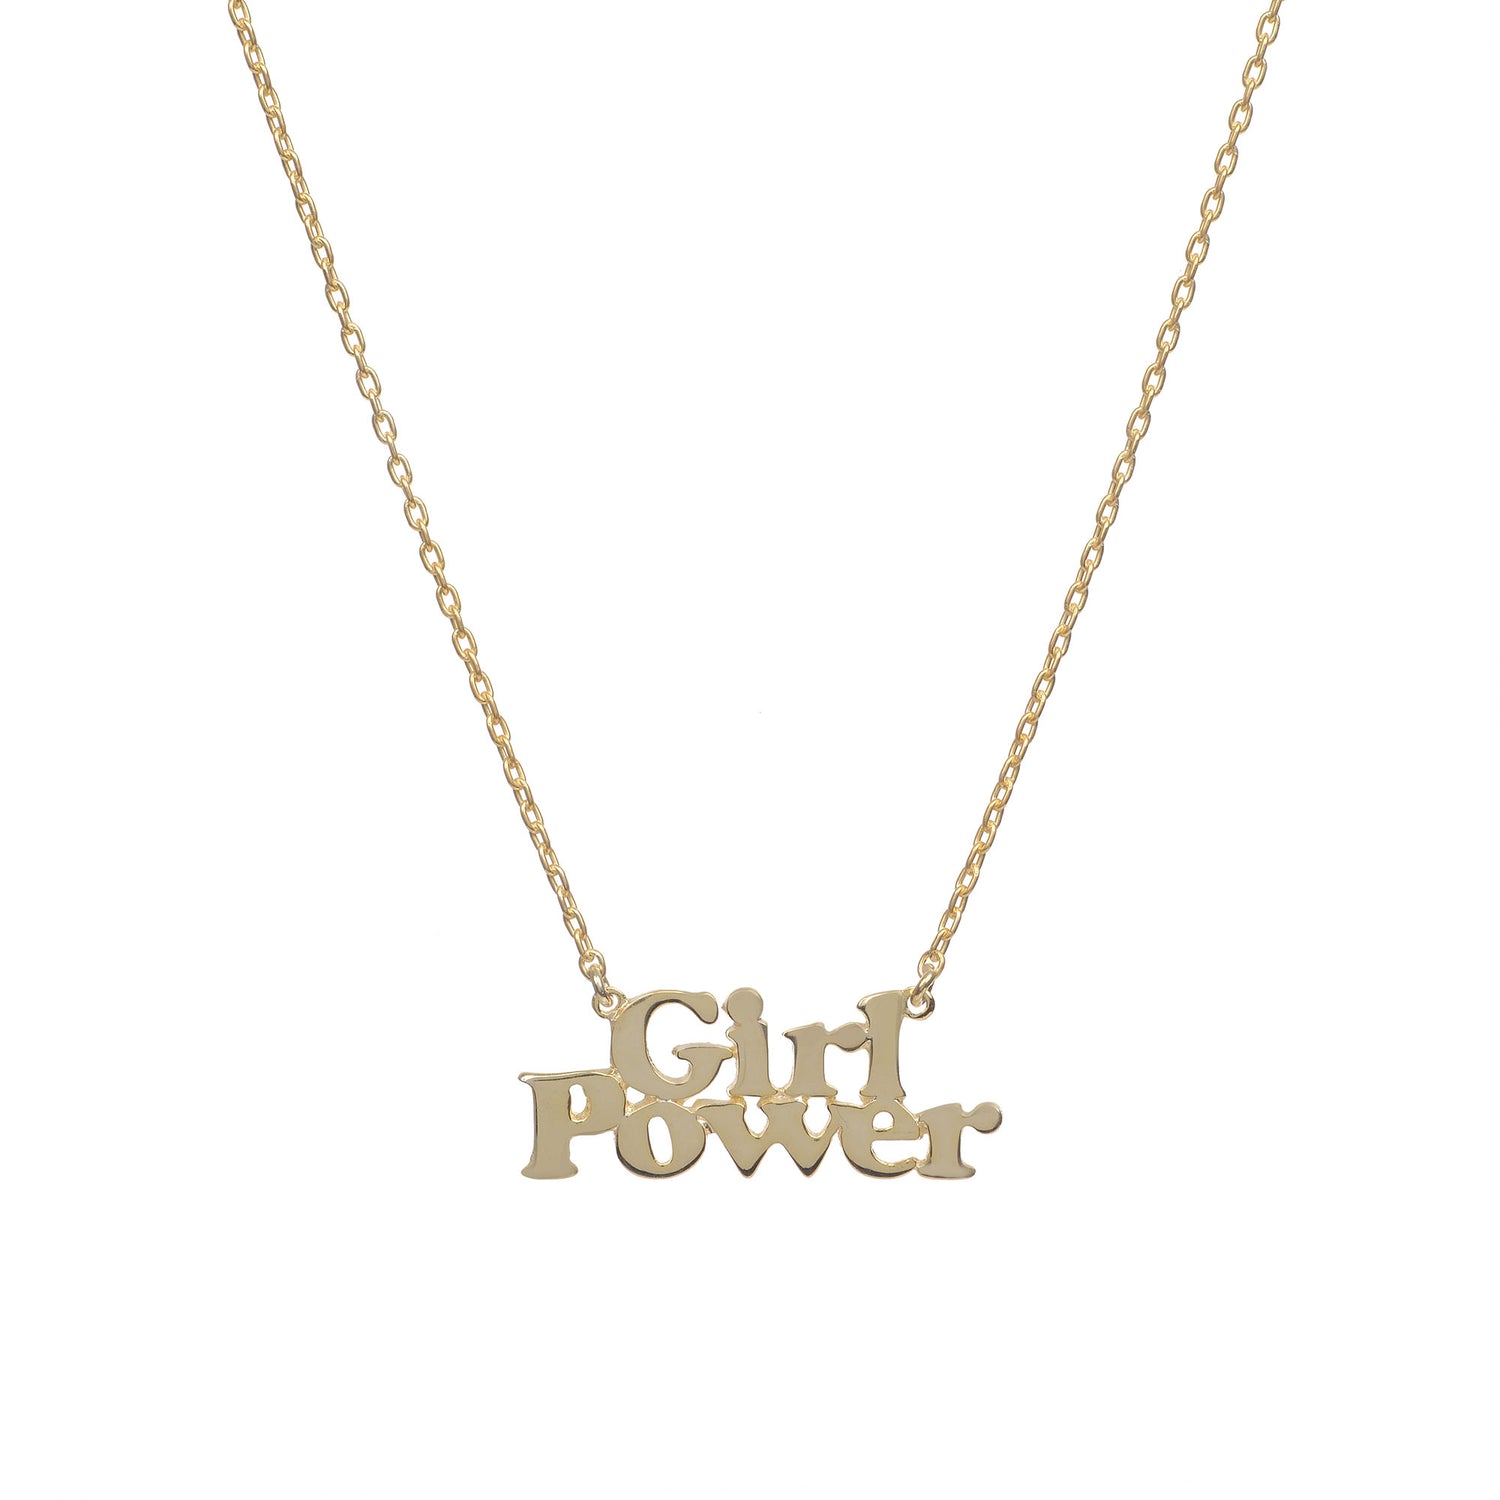 Girl Power Necklace - Bing Bang Jewelry NYC